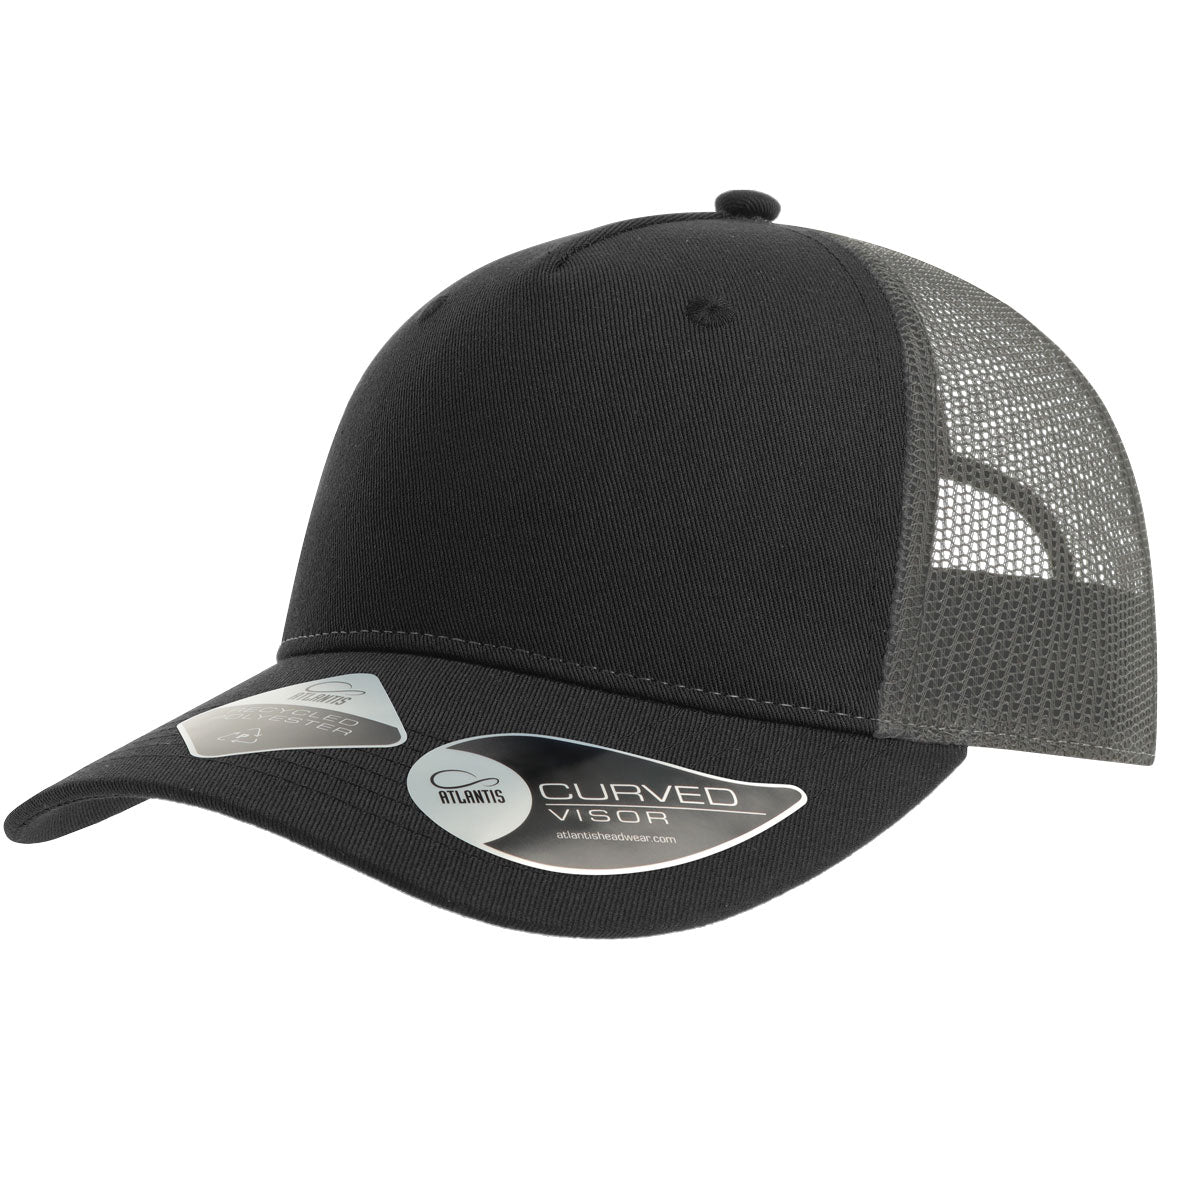 Customizable recycled polyester Atlantis truck hat in black and dark gray.